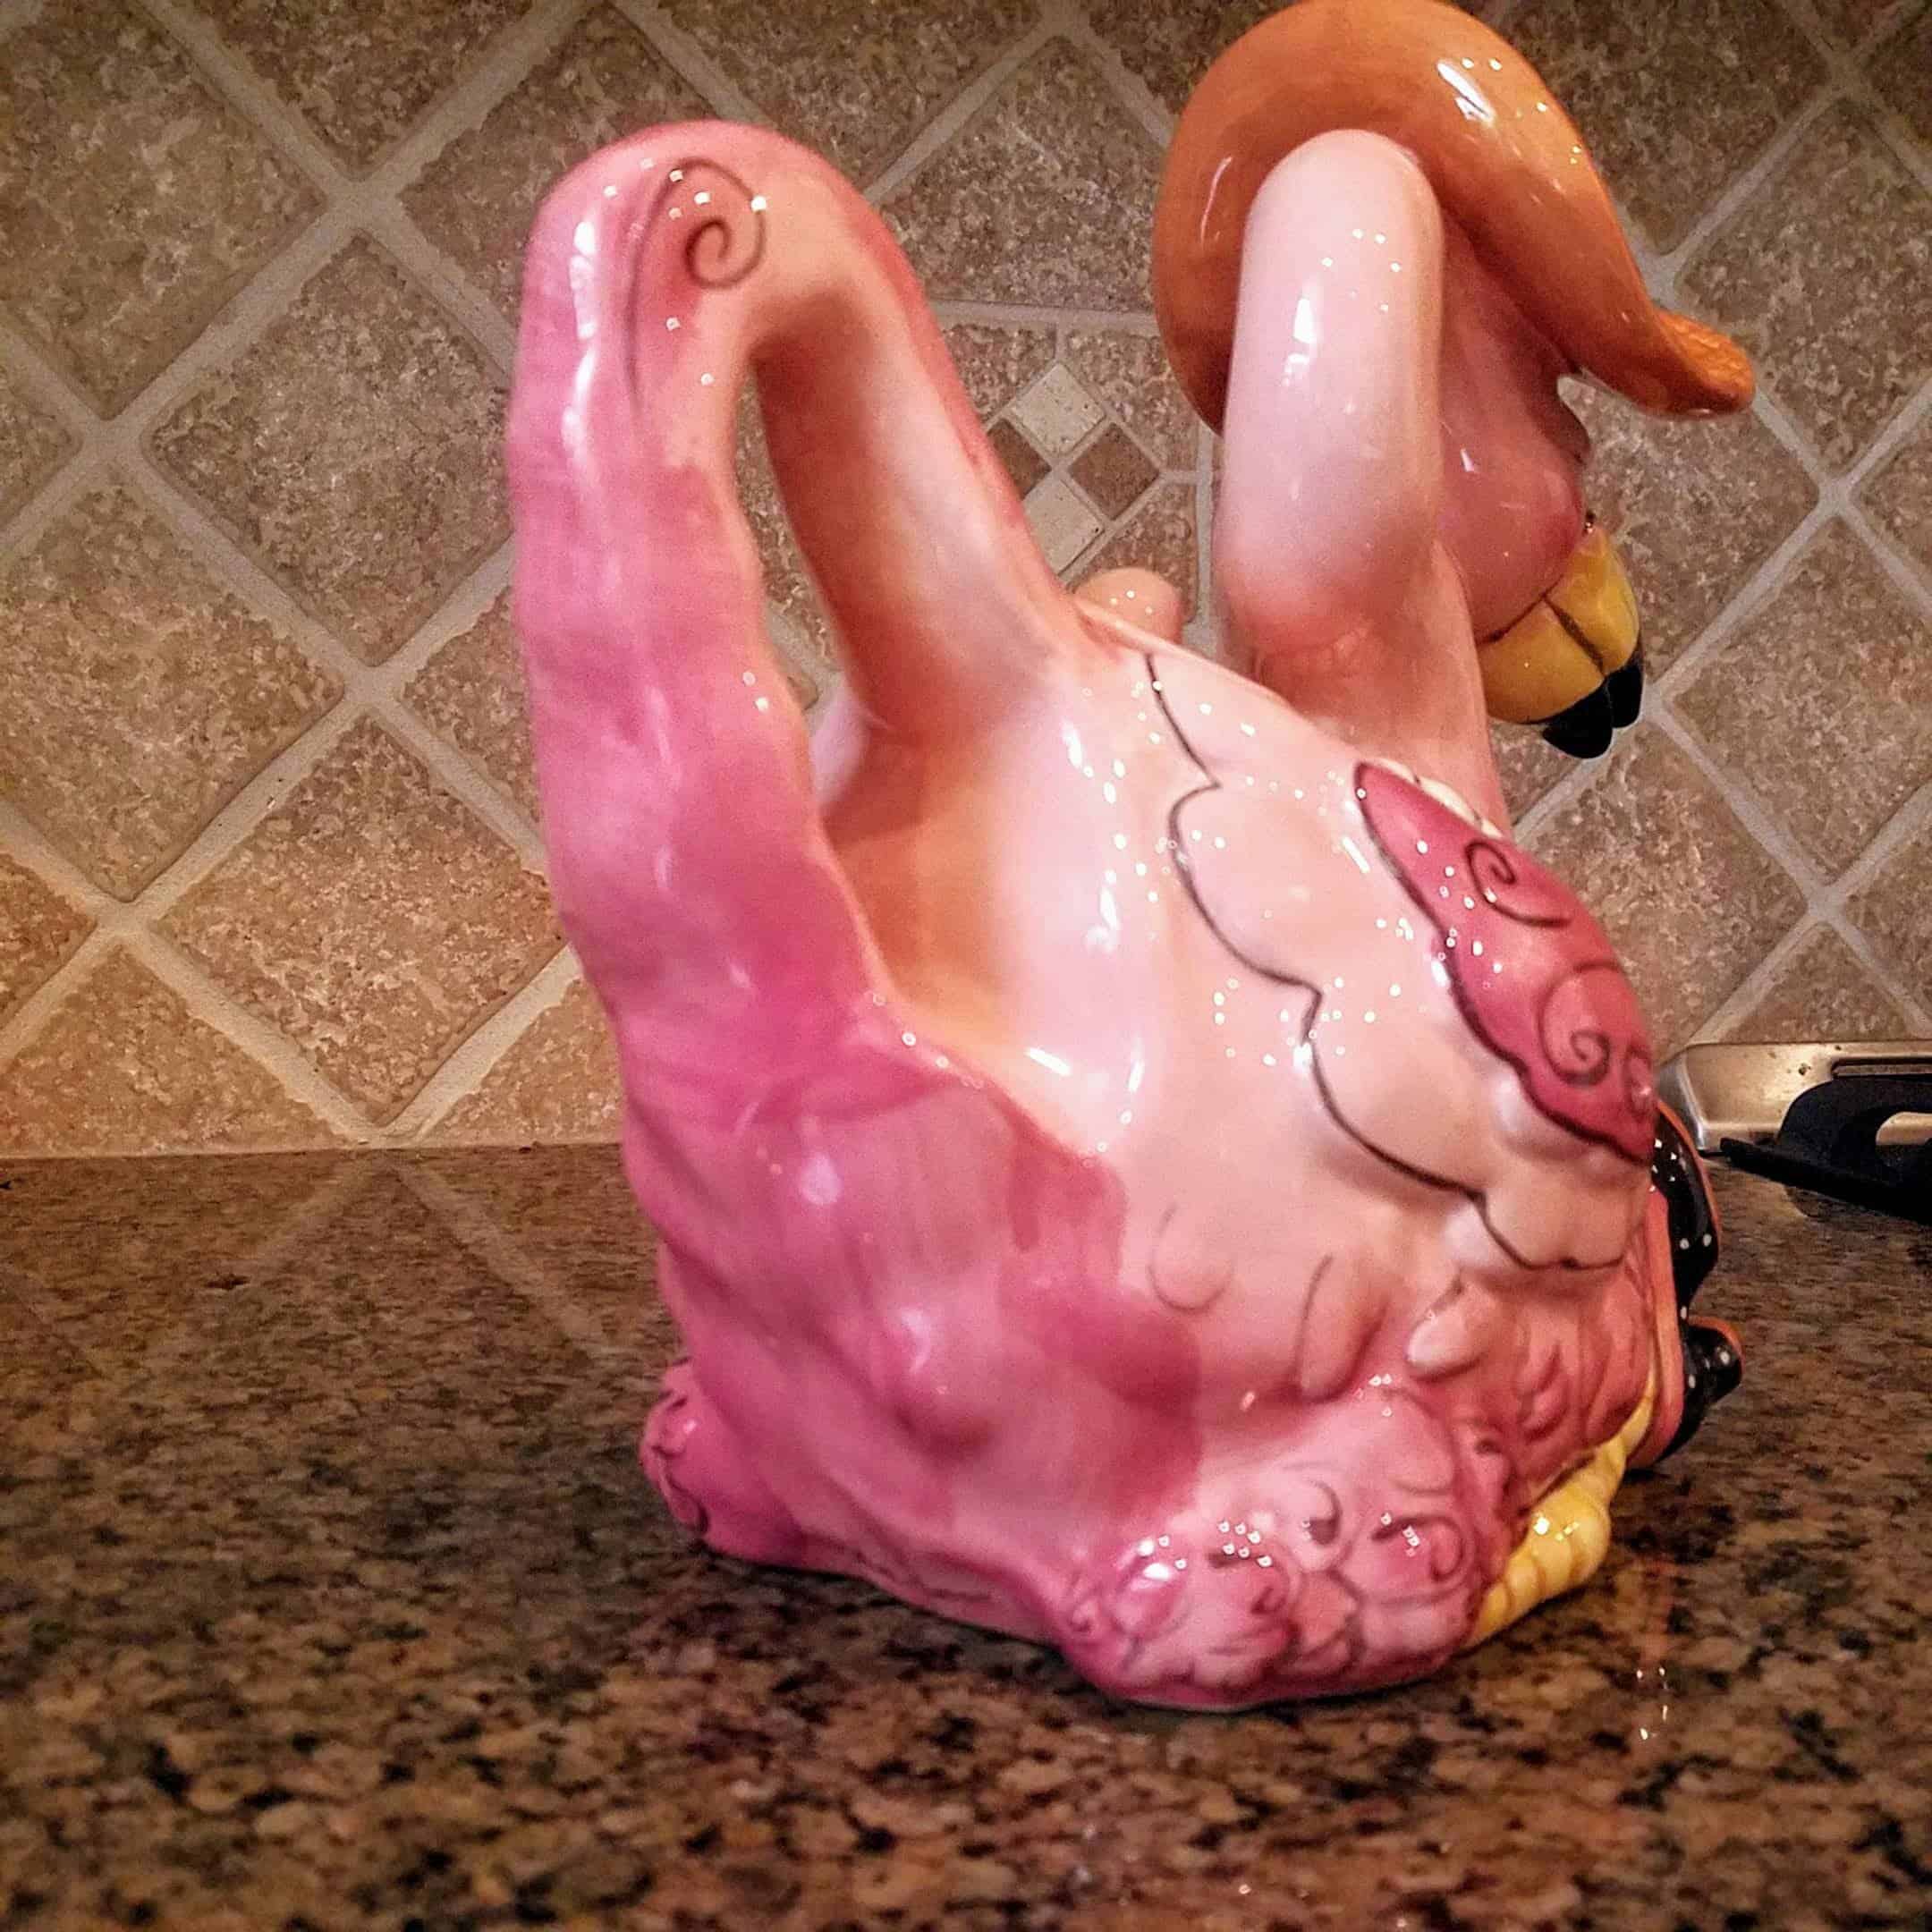 This Flamingo Teapot is made with love by Premier Homegoods! Shop more unique gift ideas today with Spots Initiatives, the best way to support creators.